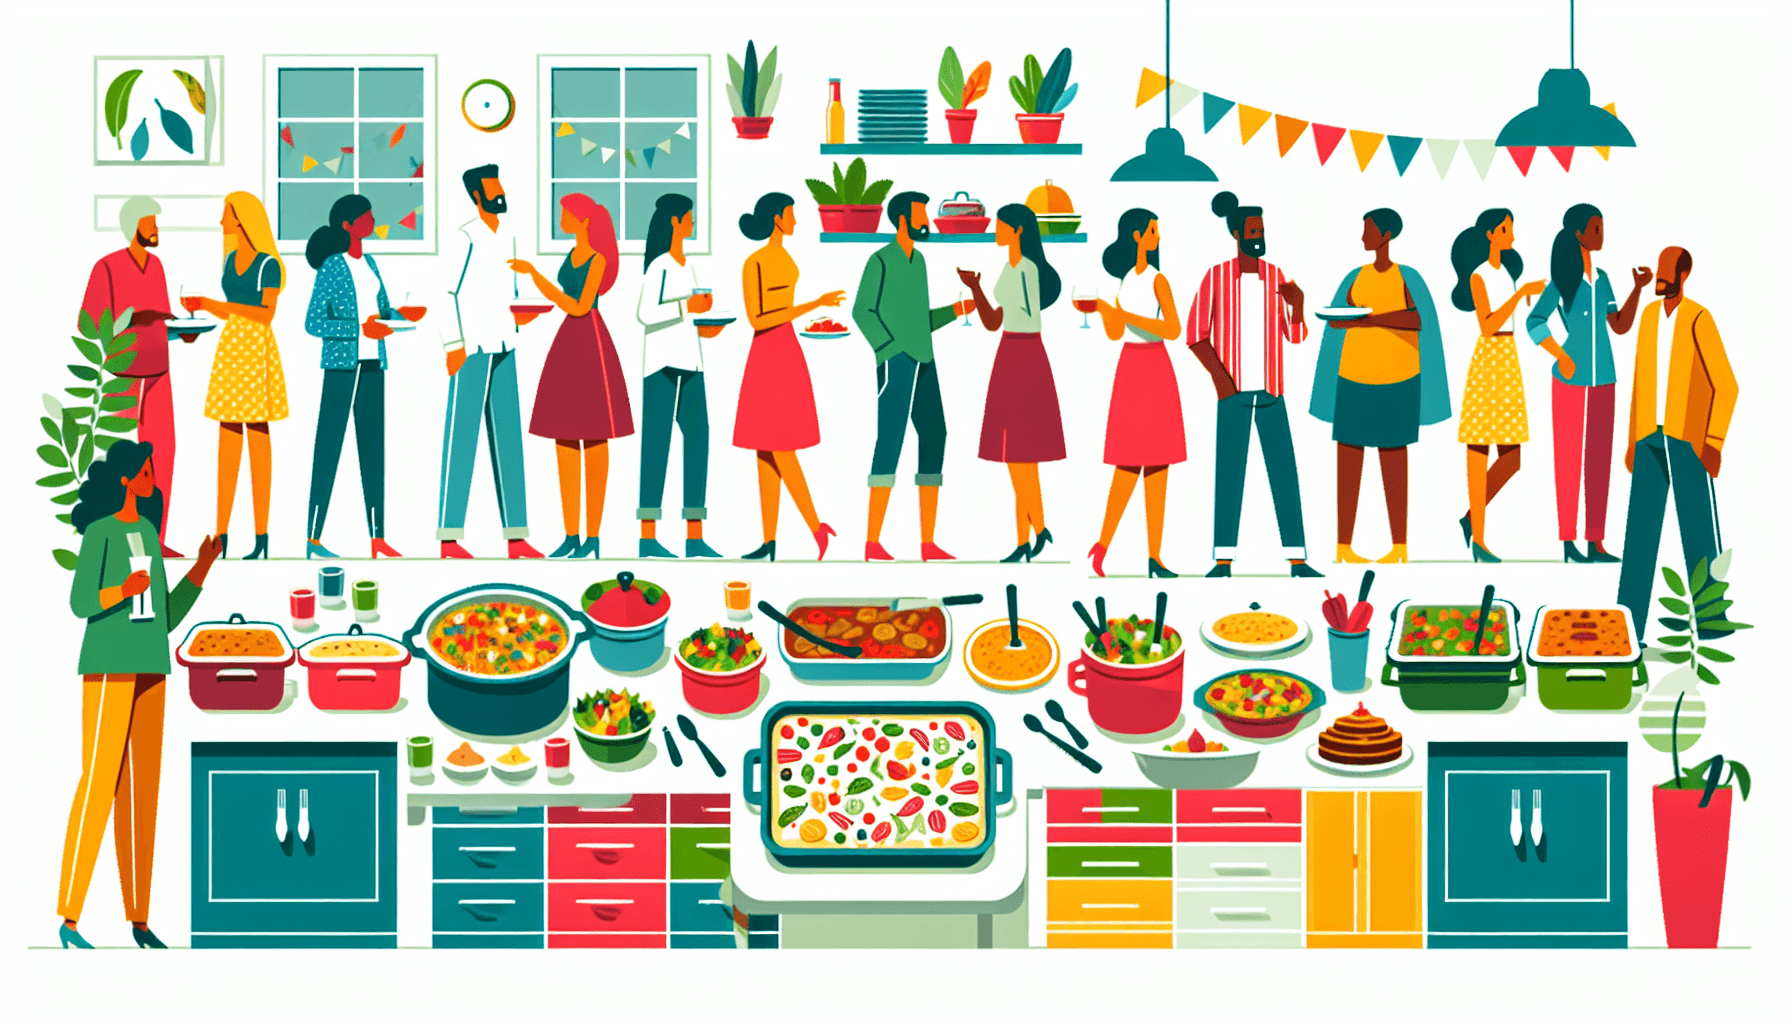 Potluck in flat illustration style and white background, red #f47574, green #88c7a8, yellow #fcc44b, and blue #645bc8 colors.